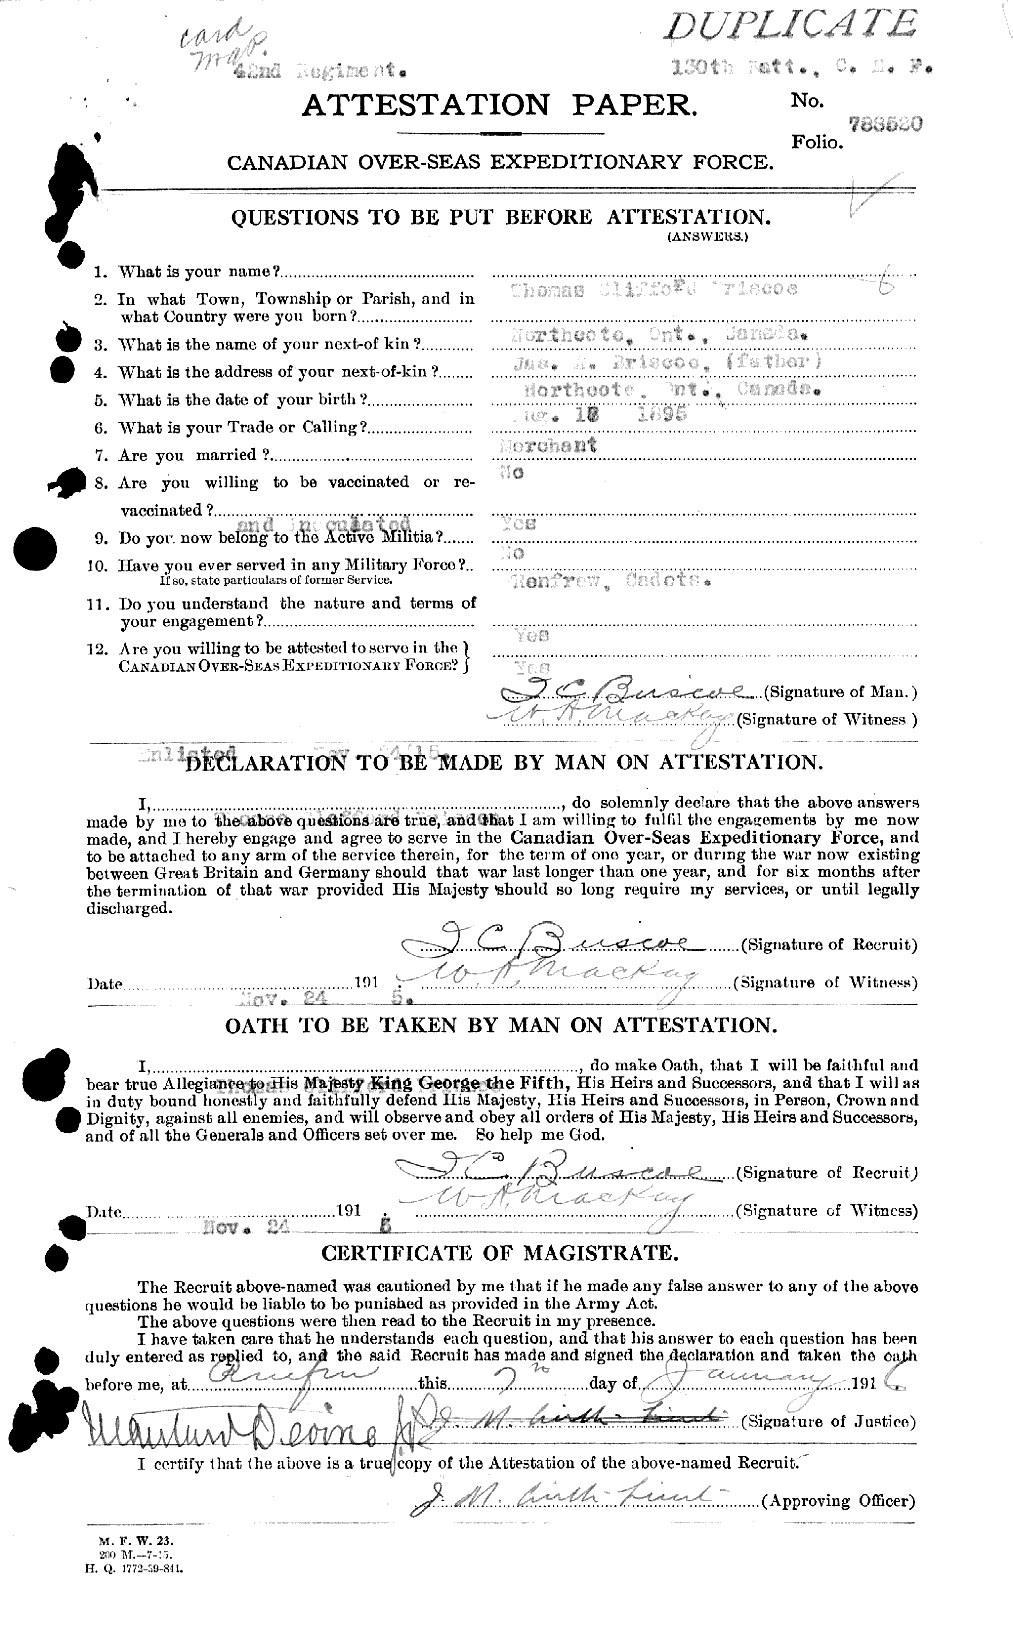 Personnel Records of the First World War - CEF 051280a